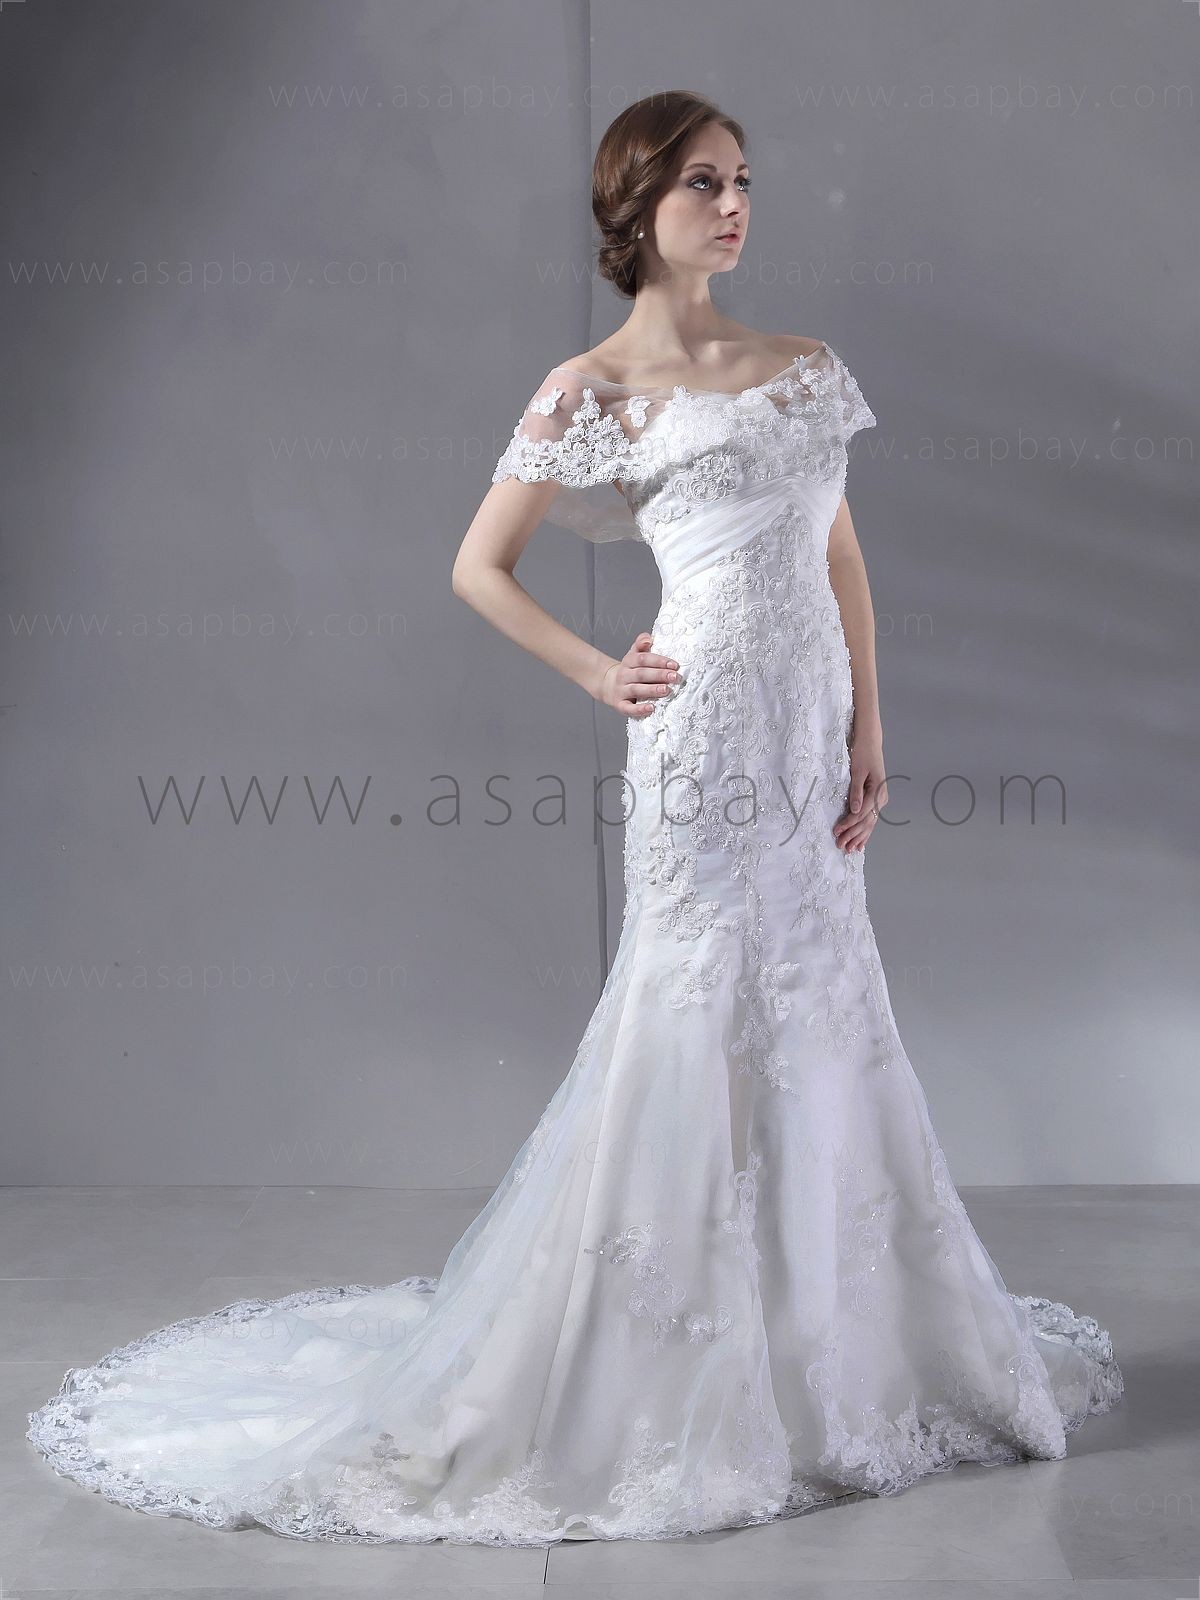 strapless mermaid wedding dresses Posted by honey sing at 00:03